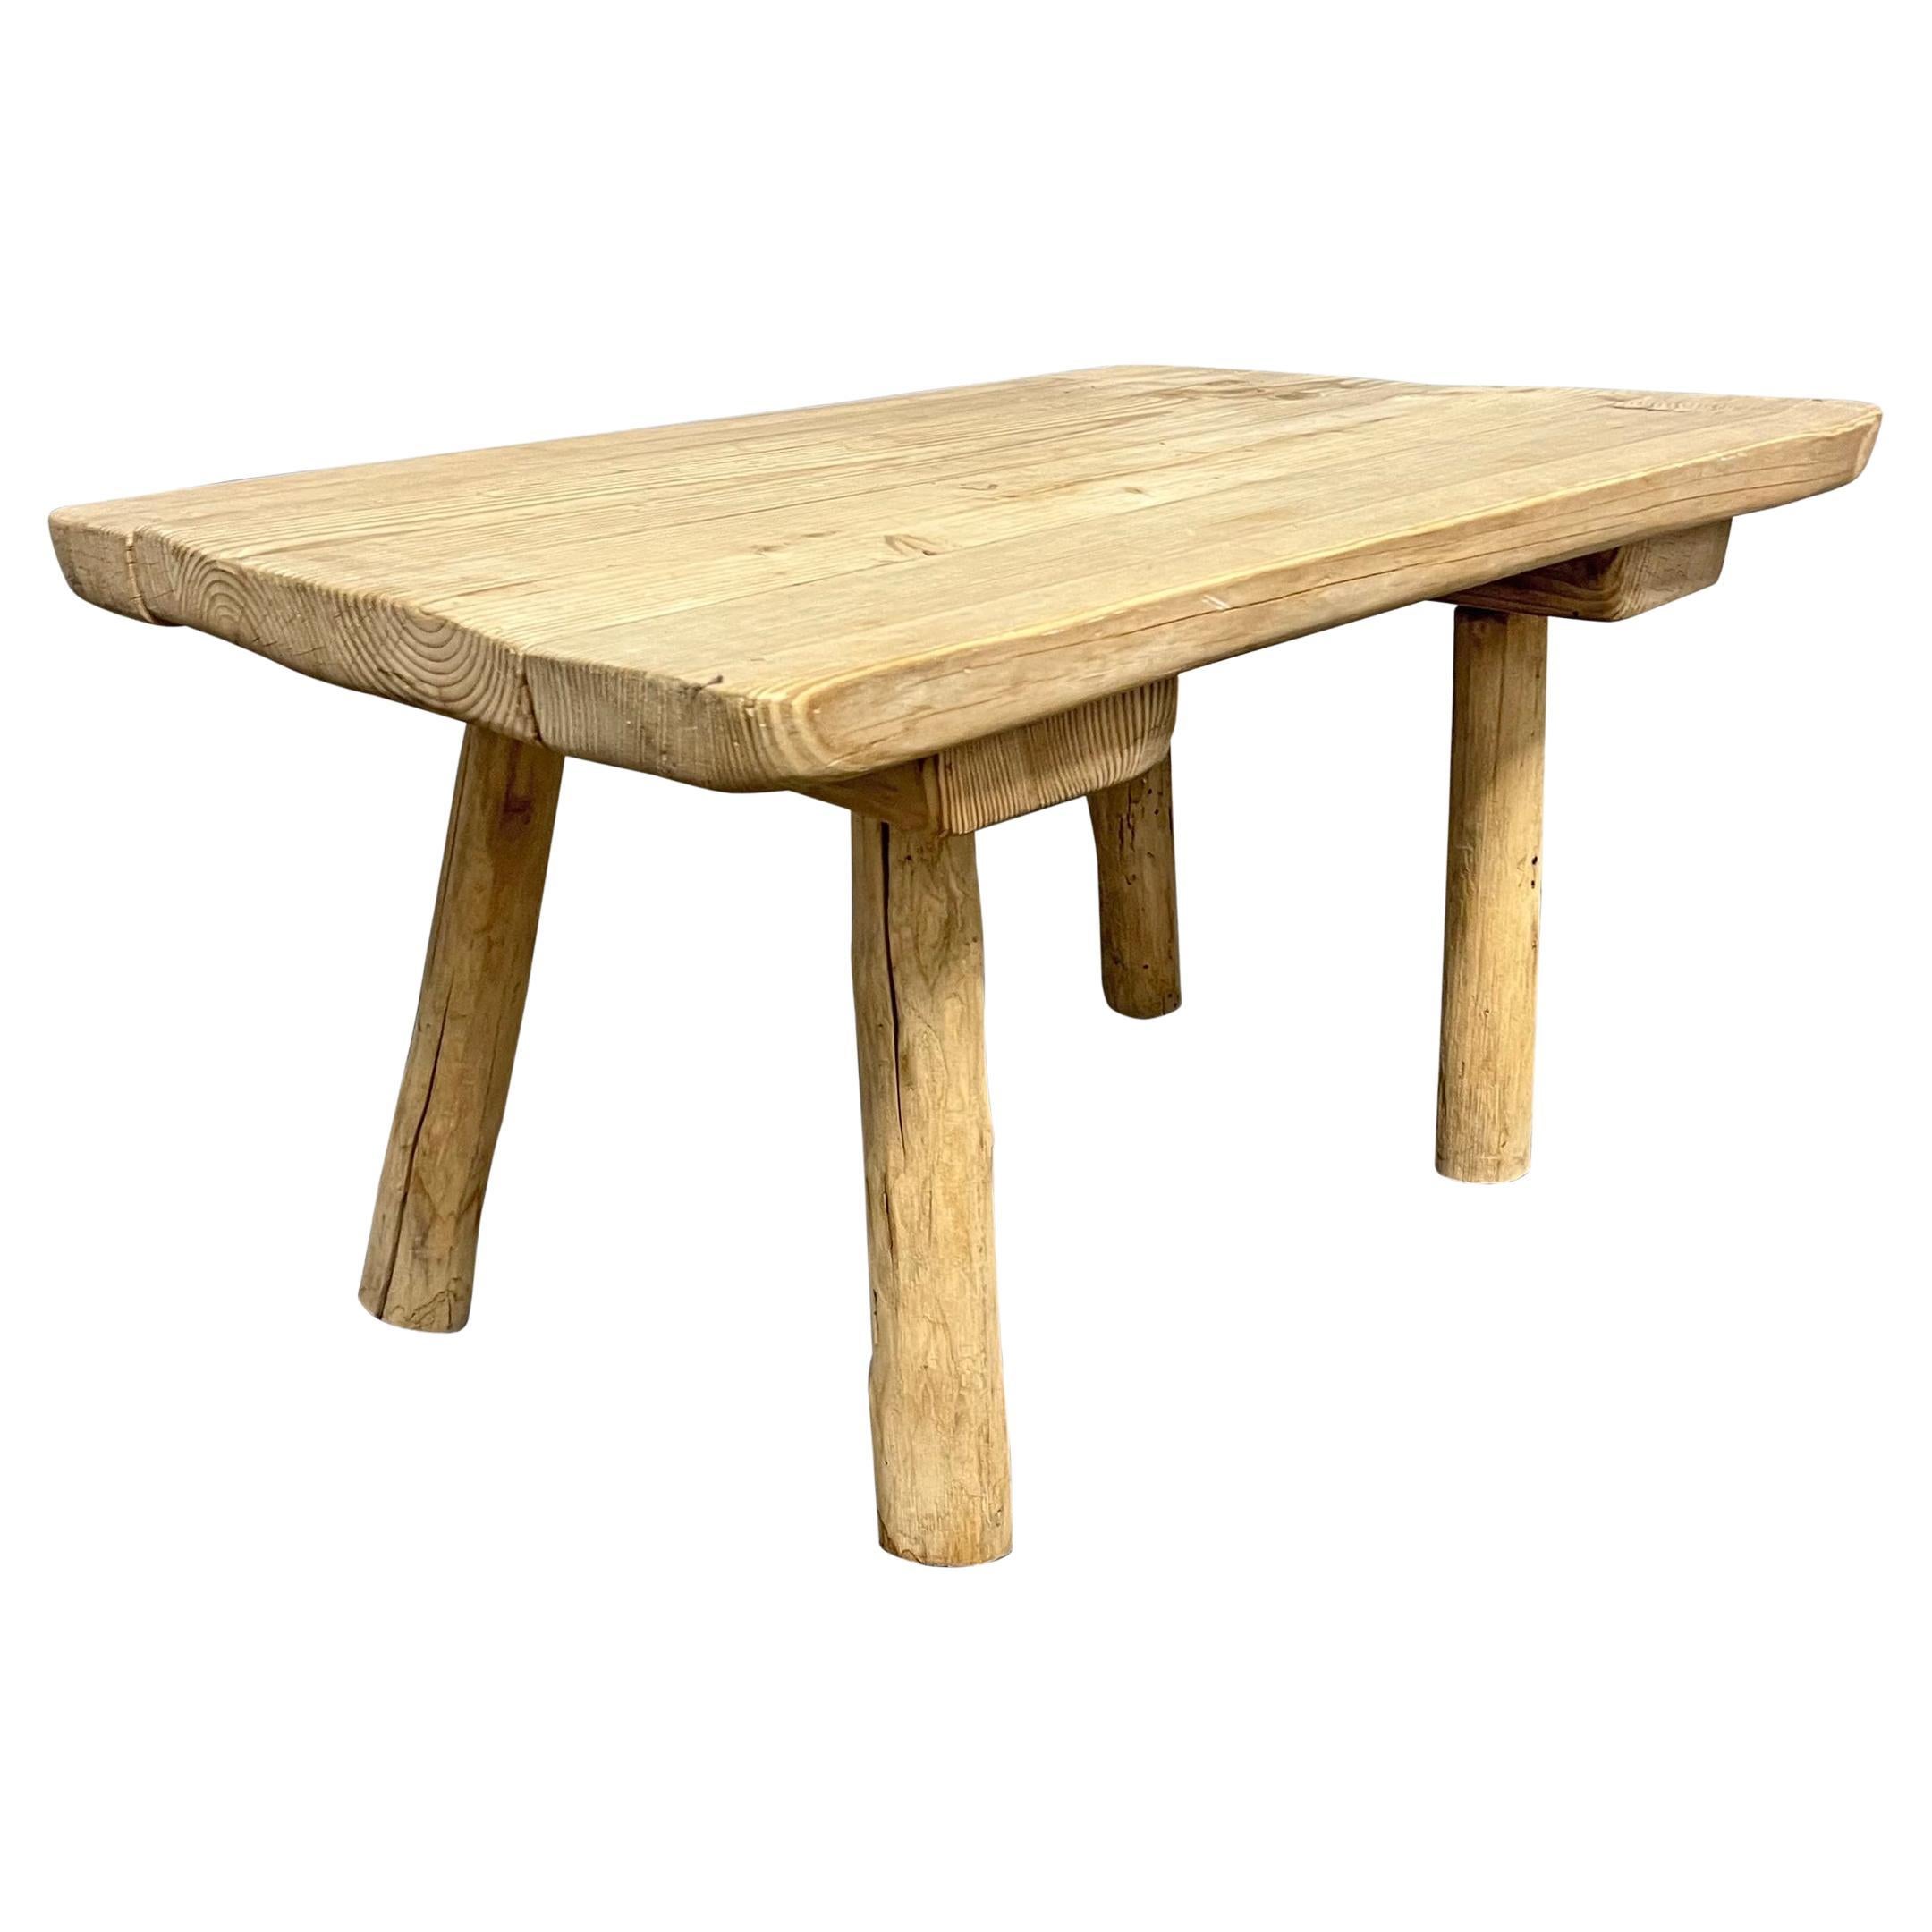 Mid-20th Century French Modernist Pine Low Table